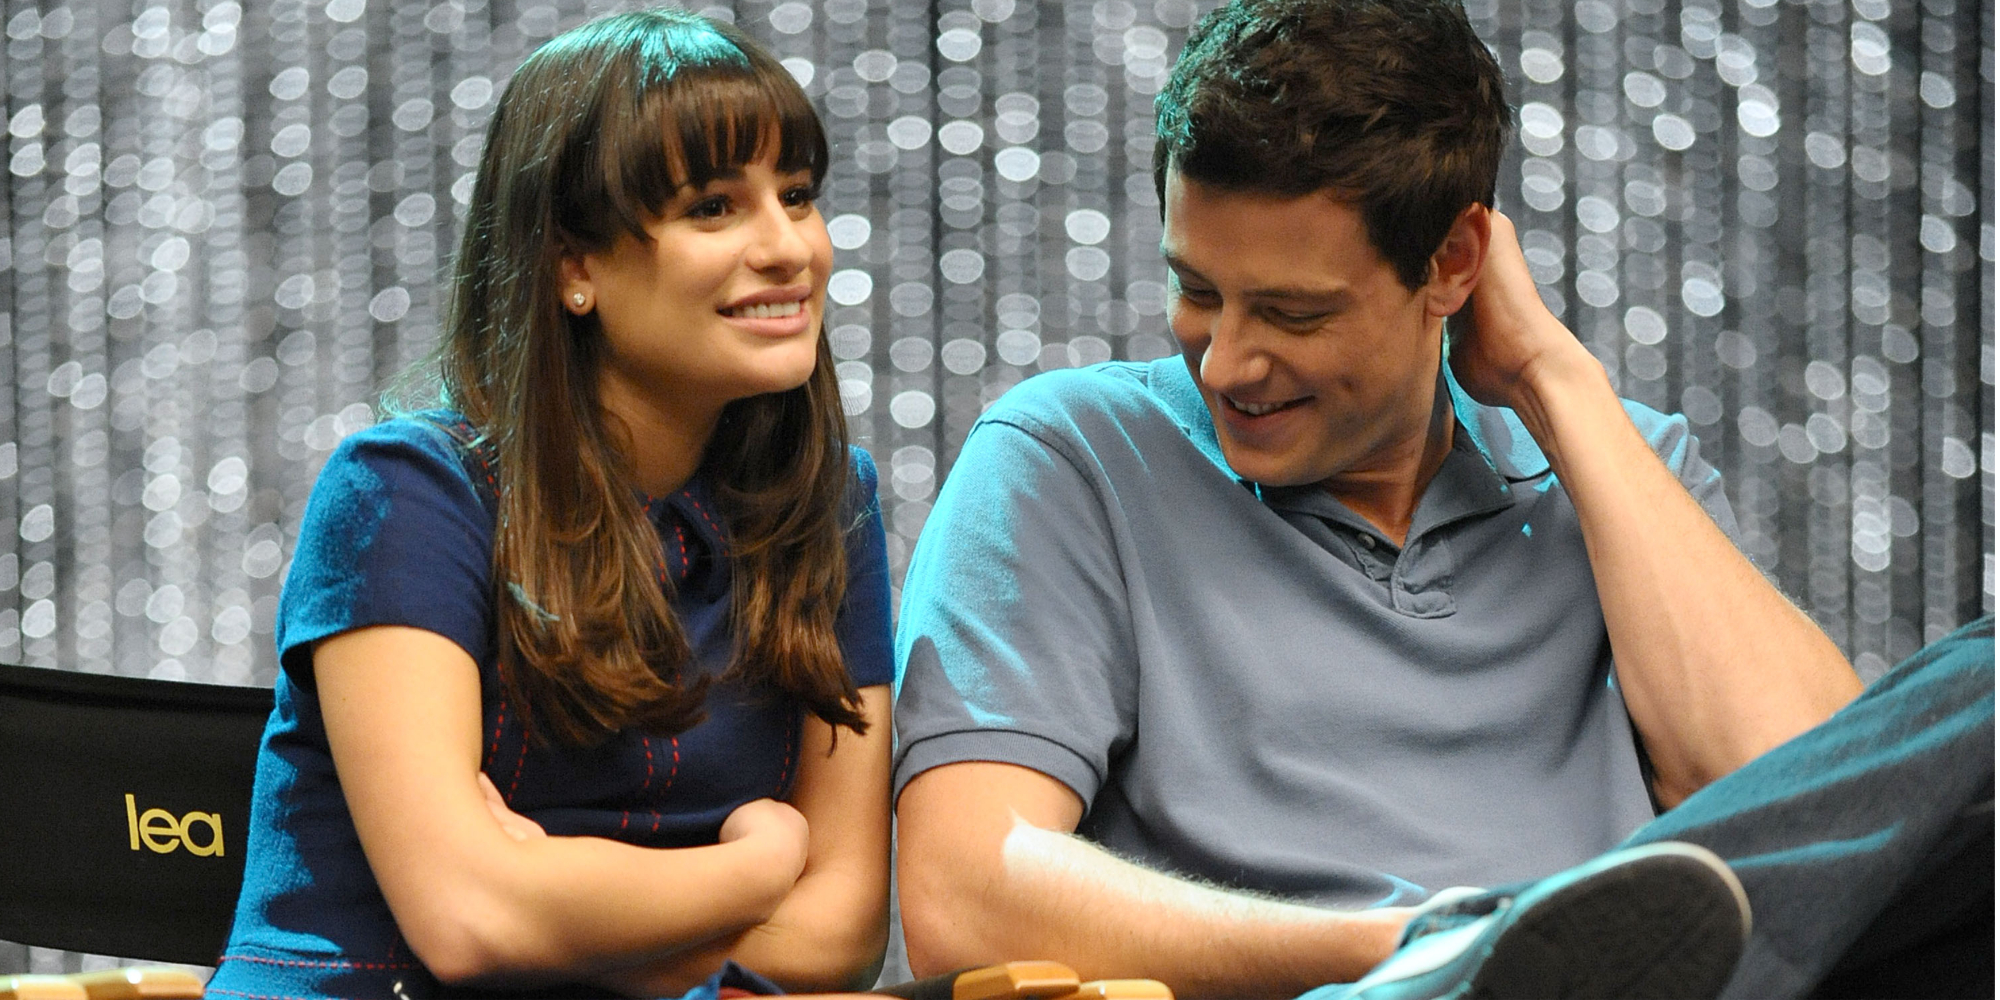 How Lea Michele’s ‘Funny Girl’ Debut Parallels Her Final ‘Glee’ Scene With Cory Monteith